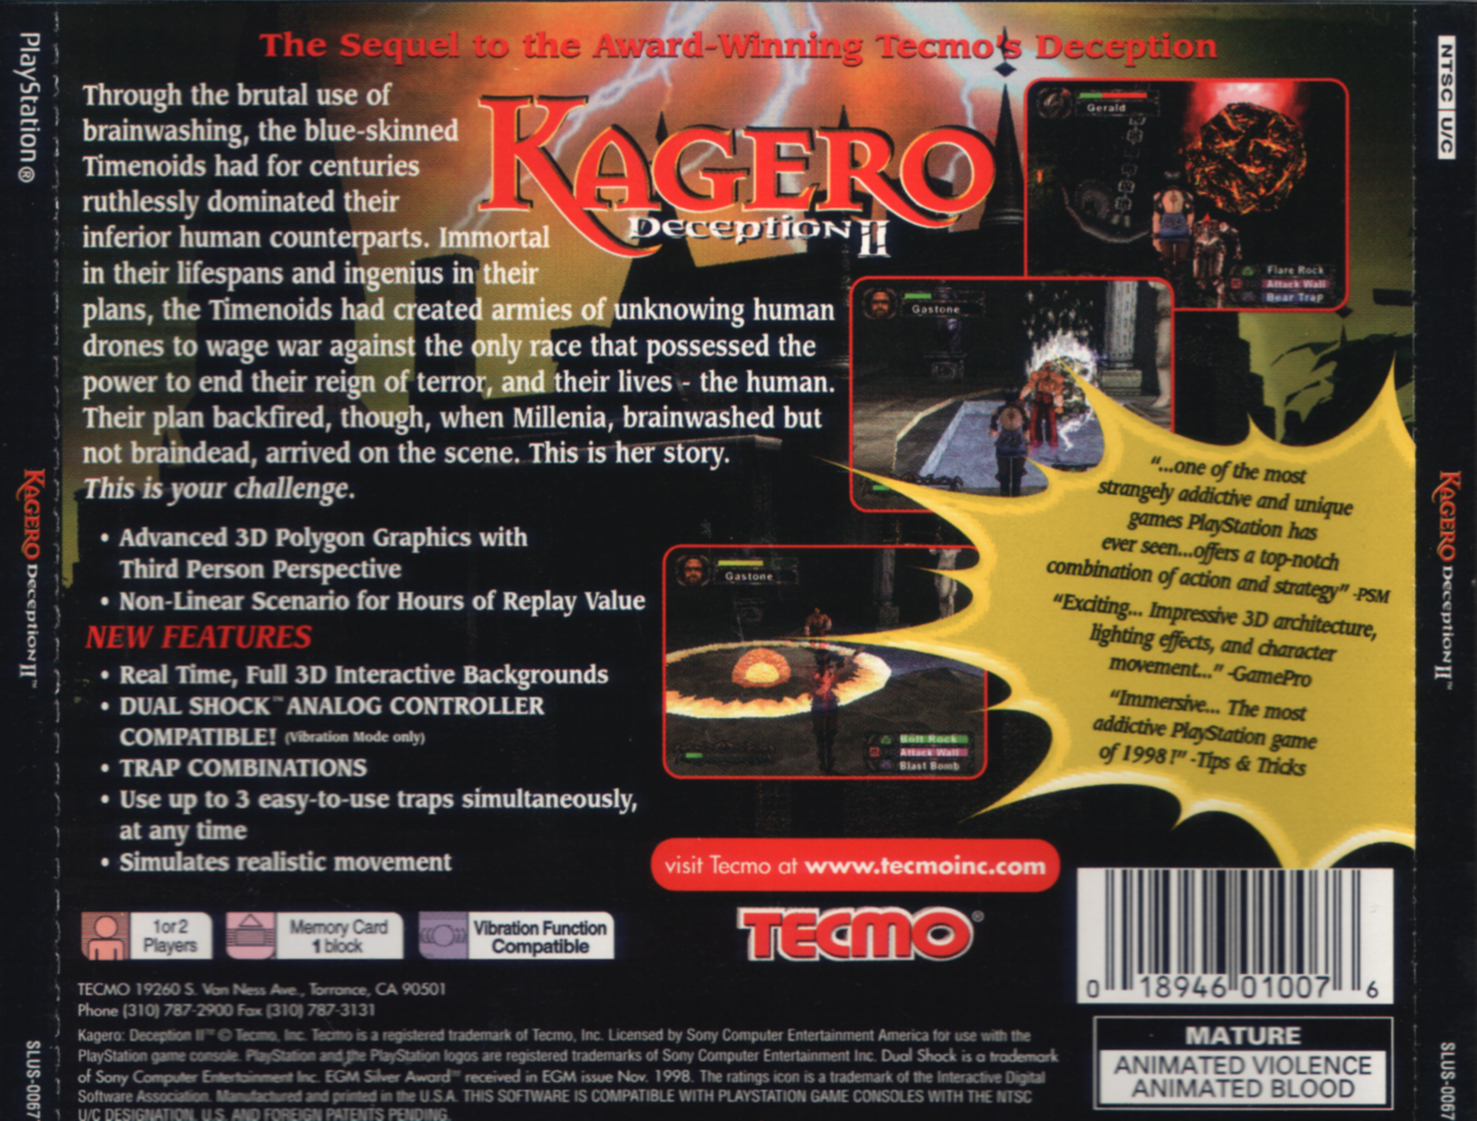 Kagero - Deception II PSX cover